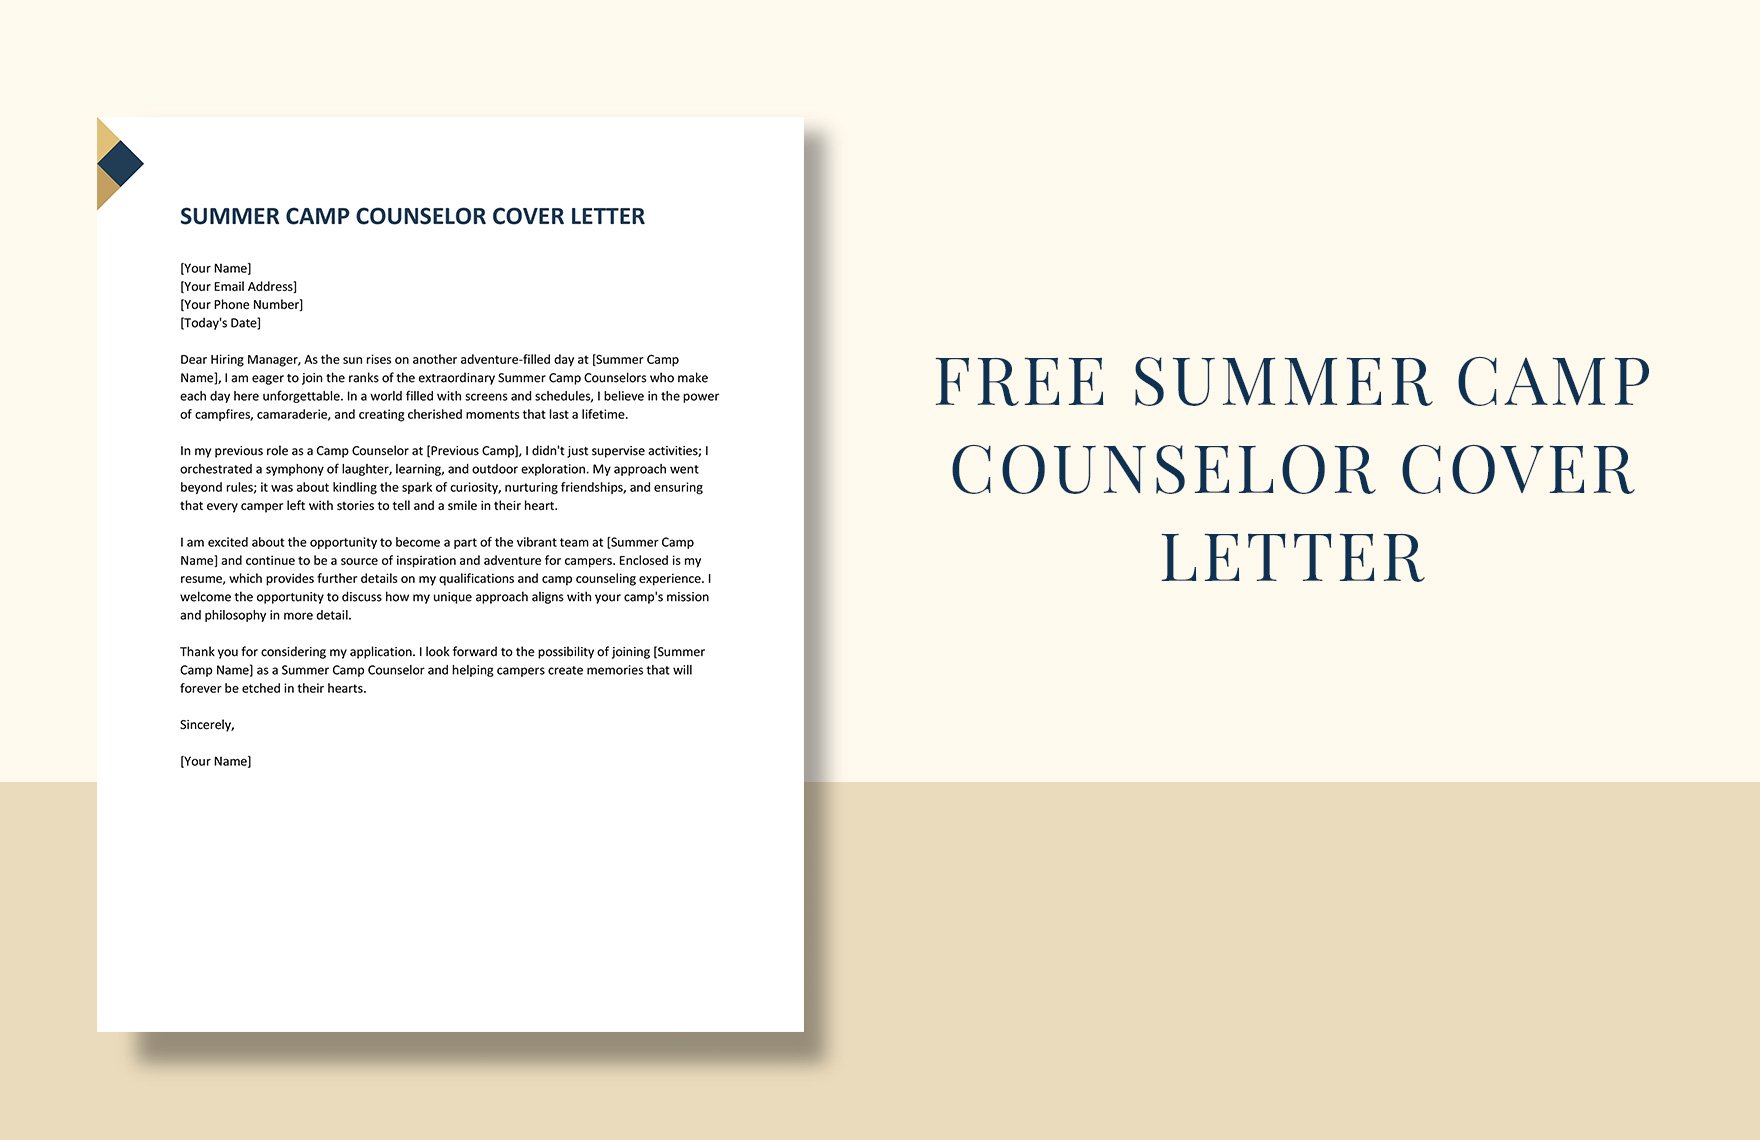 Summer Camp Counselor Cover Letter